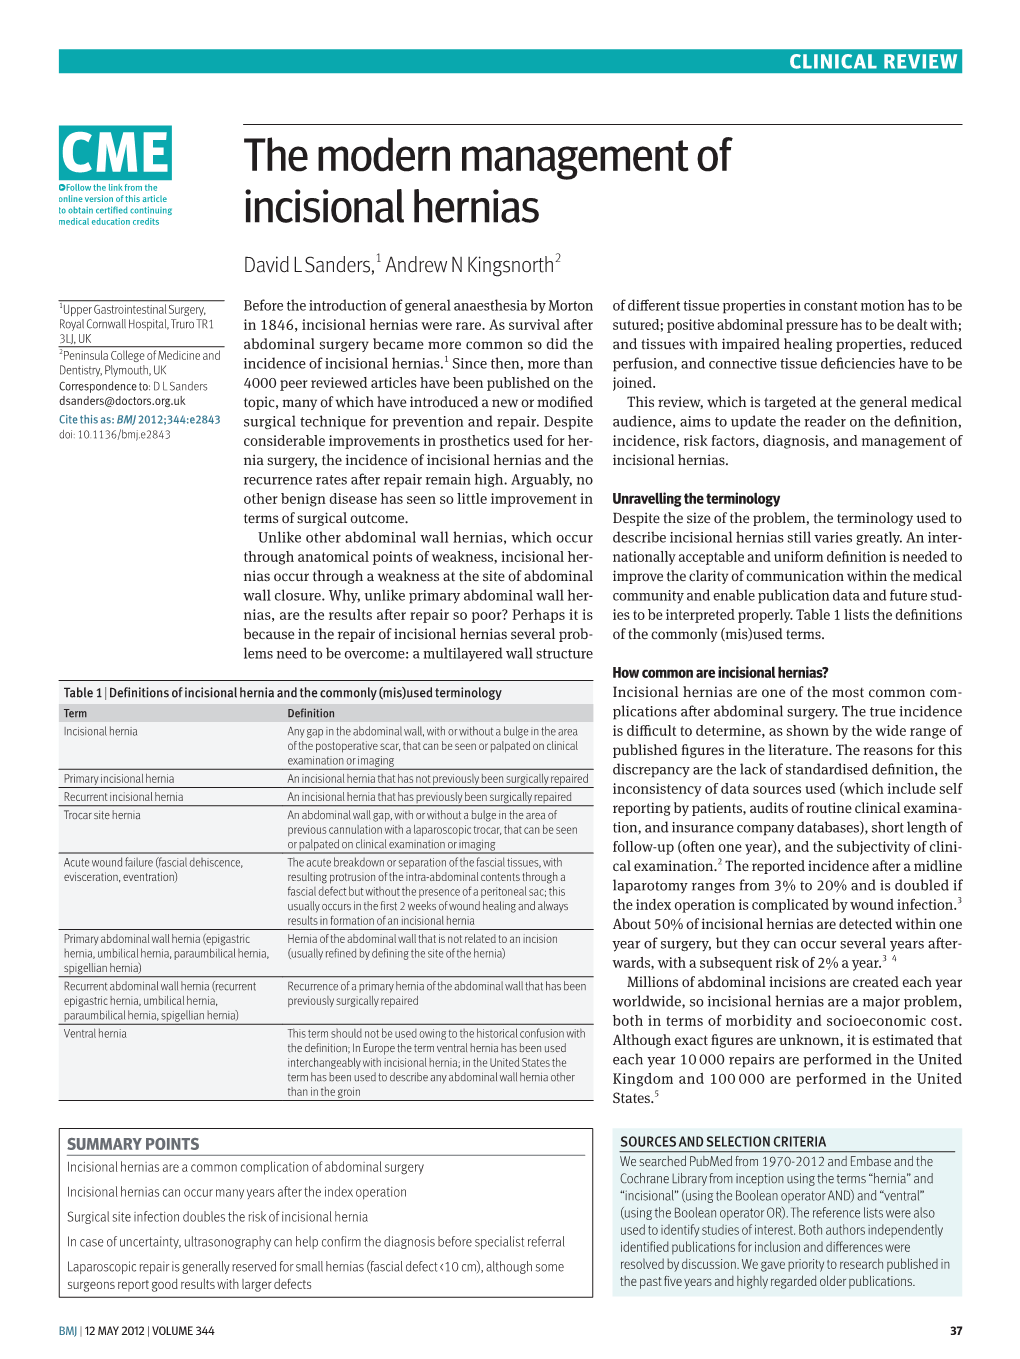 The Modern Management of Incisional Hernias